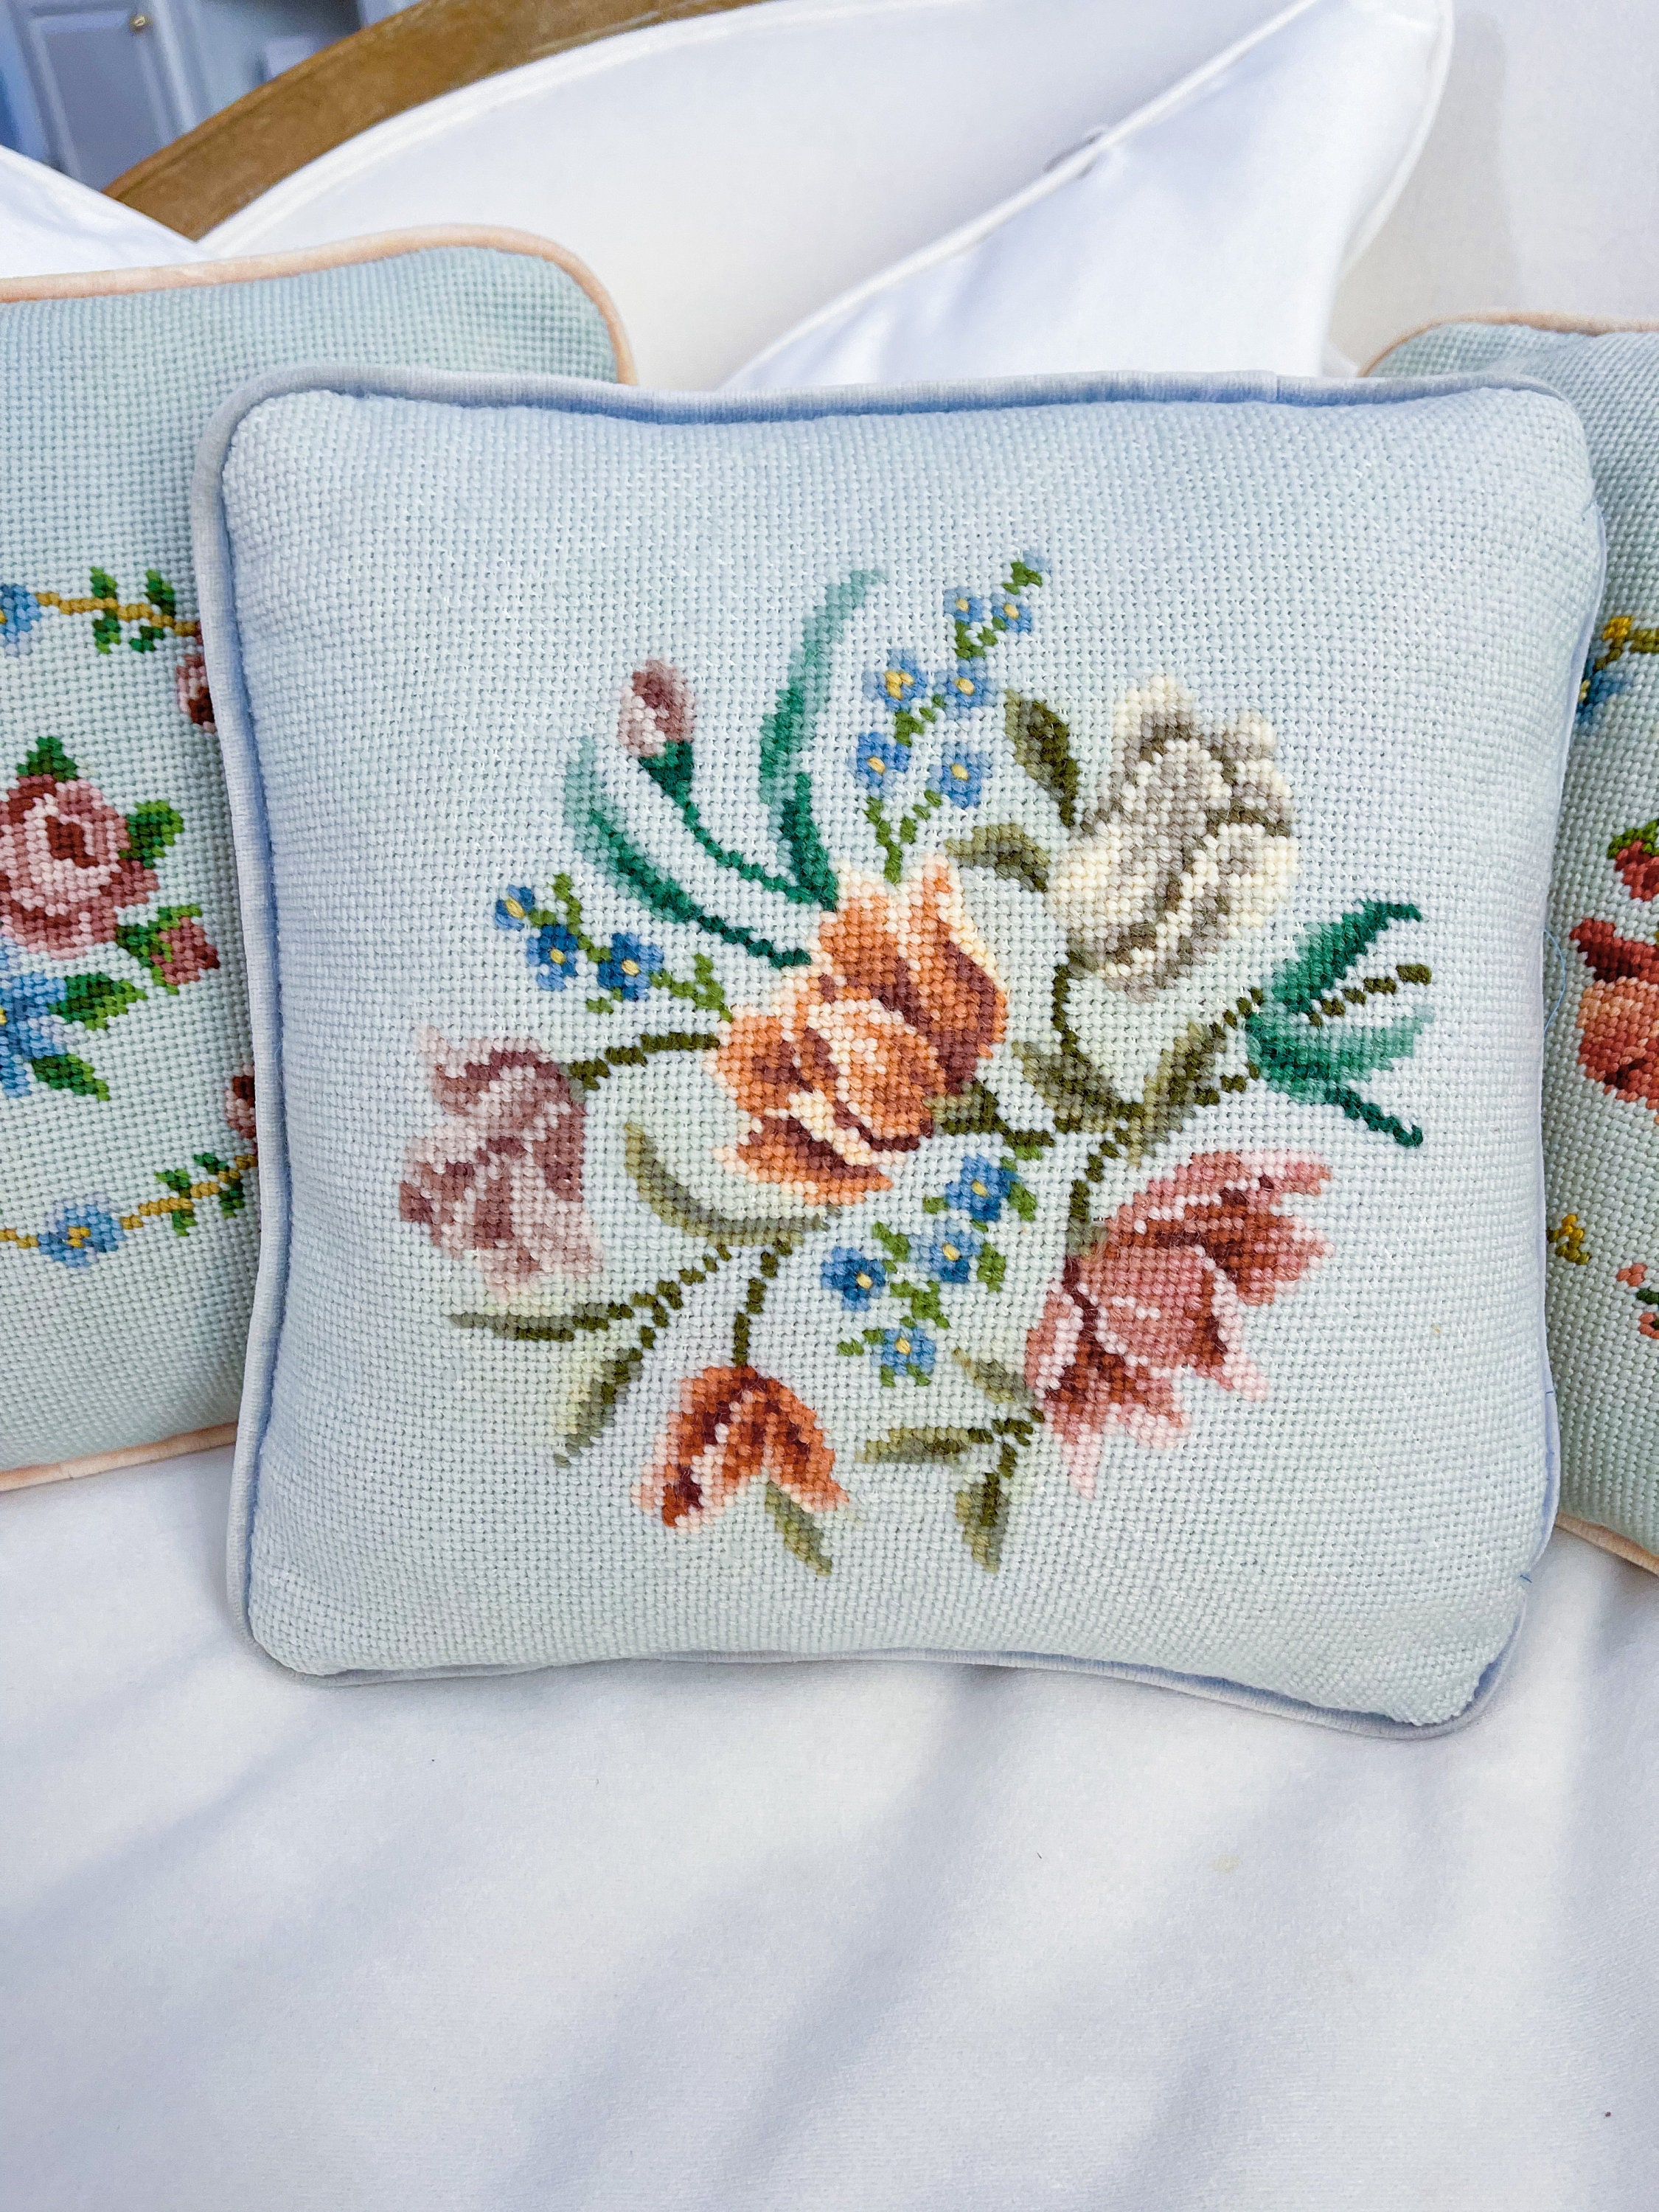 24″x24″ Cabbage Roses Needlepoint Pillow Cover 12981139 – Goodluck